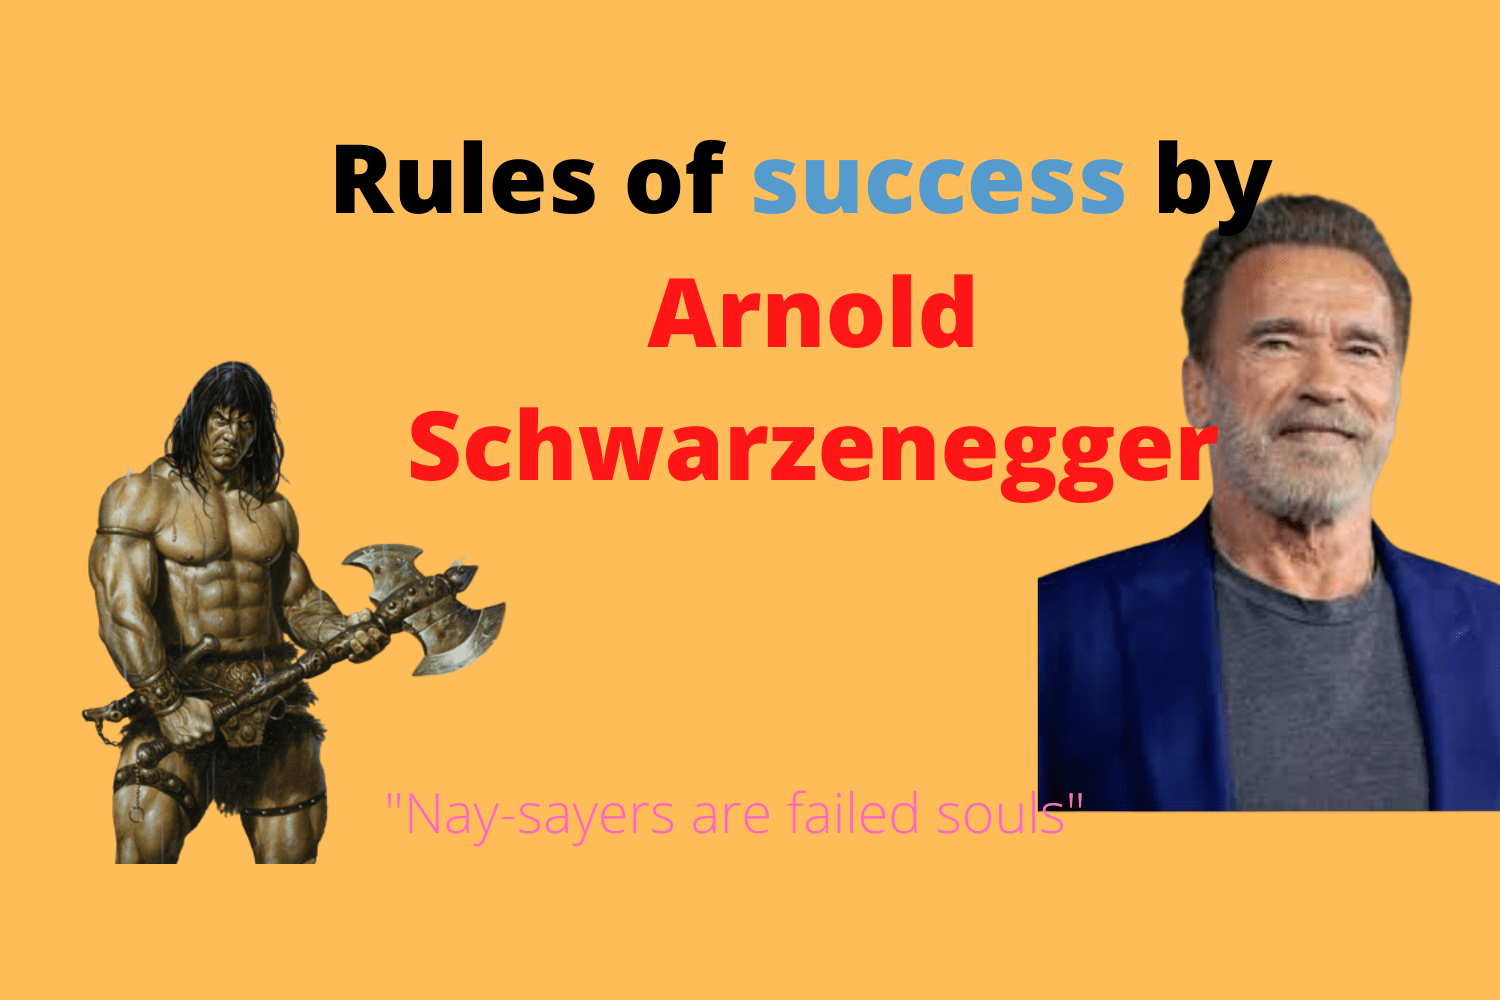 laws of success by Arnold Schwarzenegger